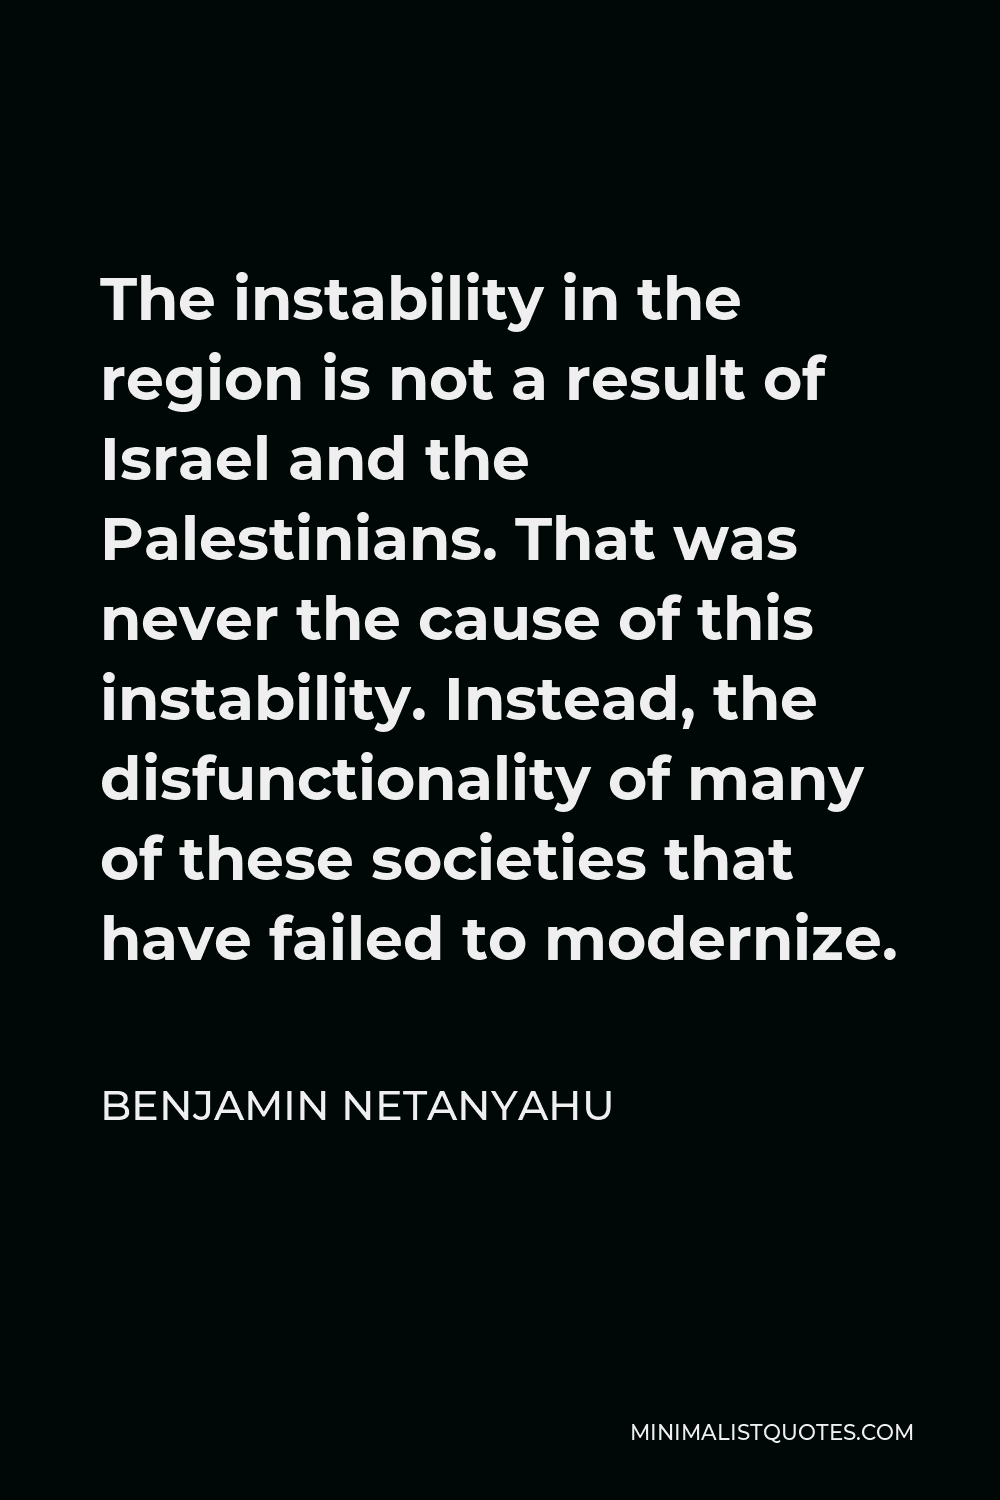 Benjamin Netanyahu Quote - The instability in the region is not a result of Israel and the Palestinians. That was never the cause of this instability. Instead, the disfunctionality of many of these societies that have failed to modernize.